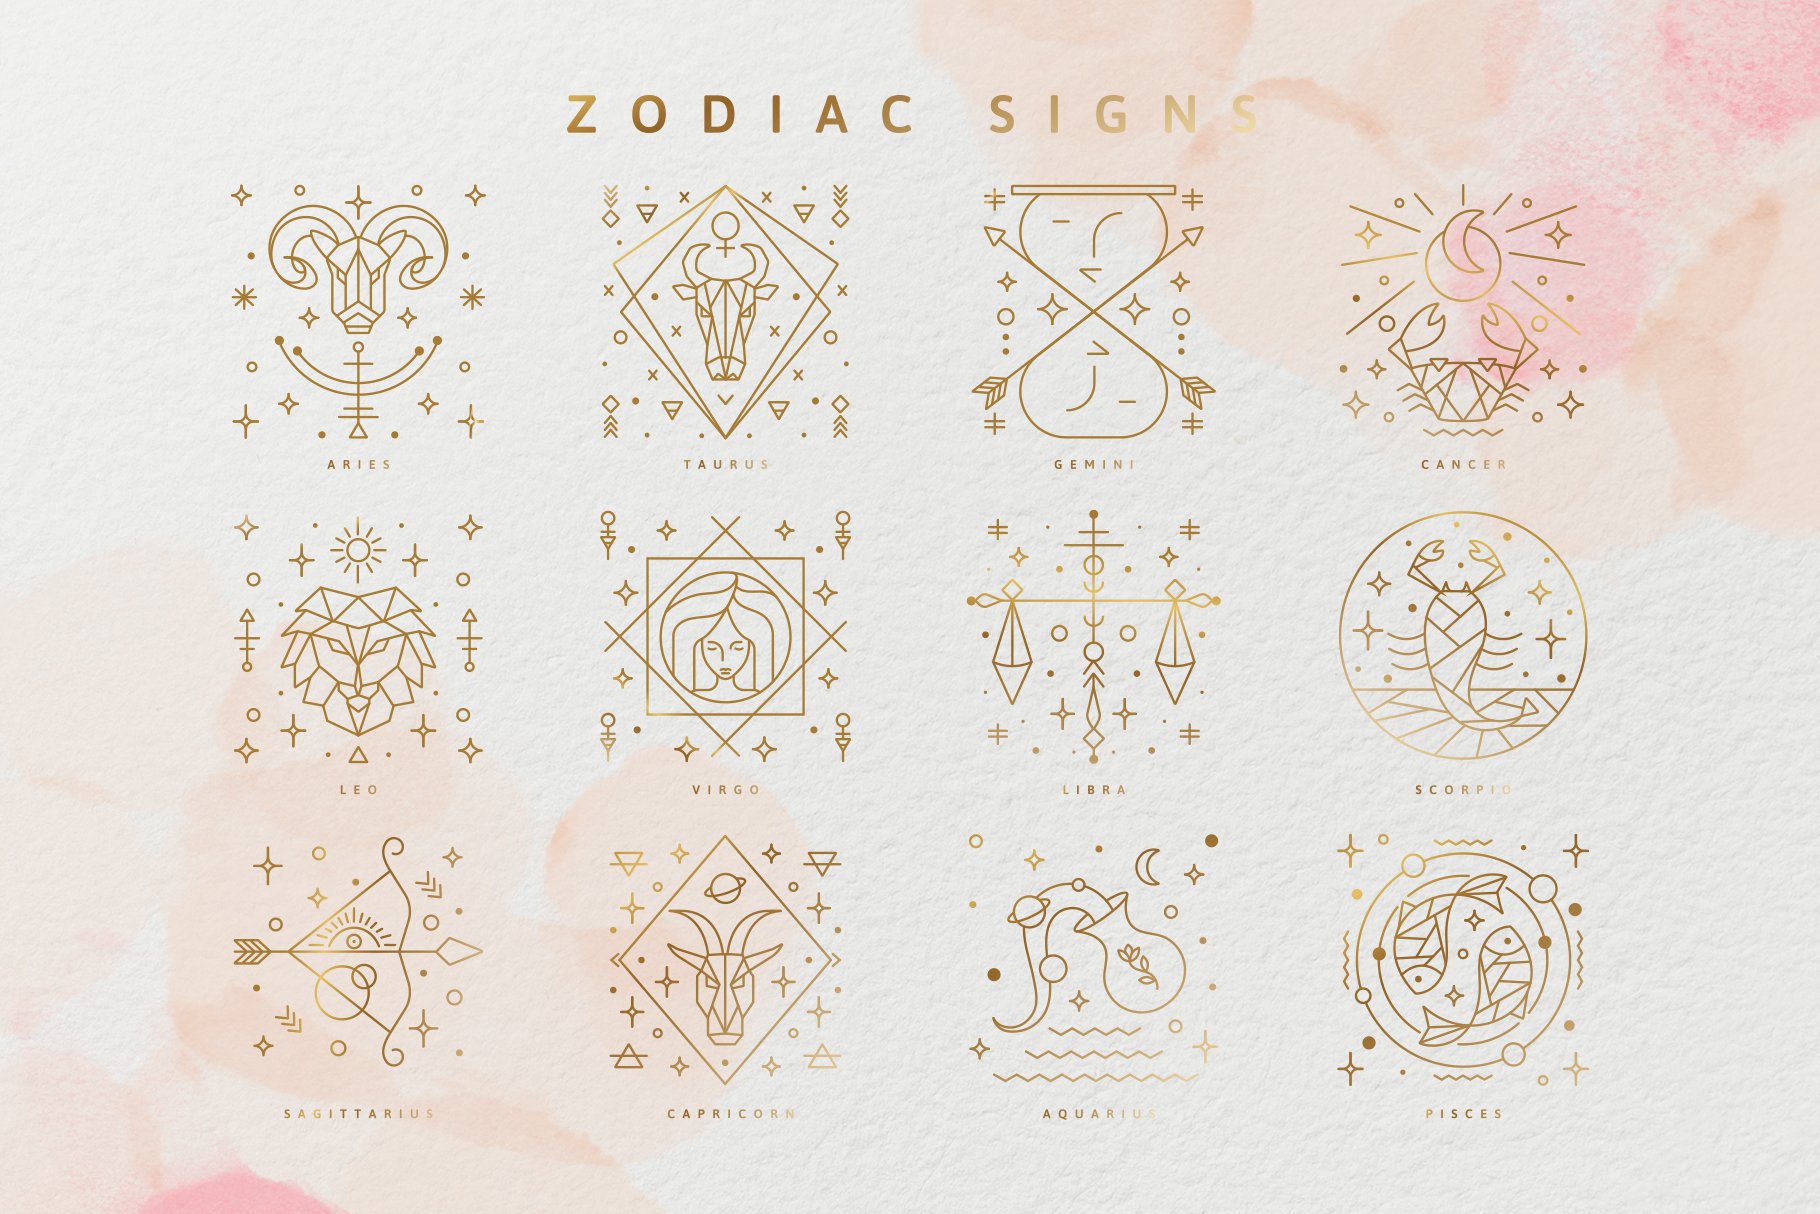 Gold zodiac signs in a royal style for your products.